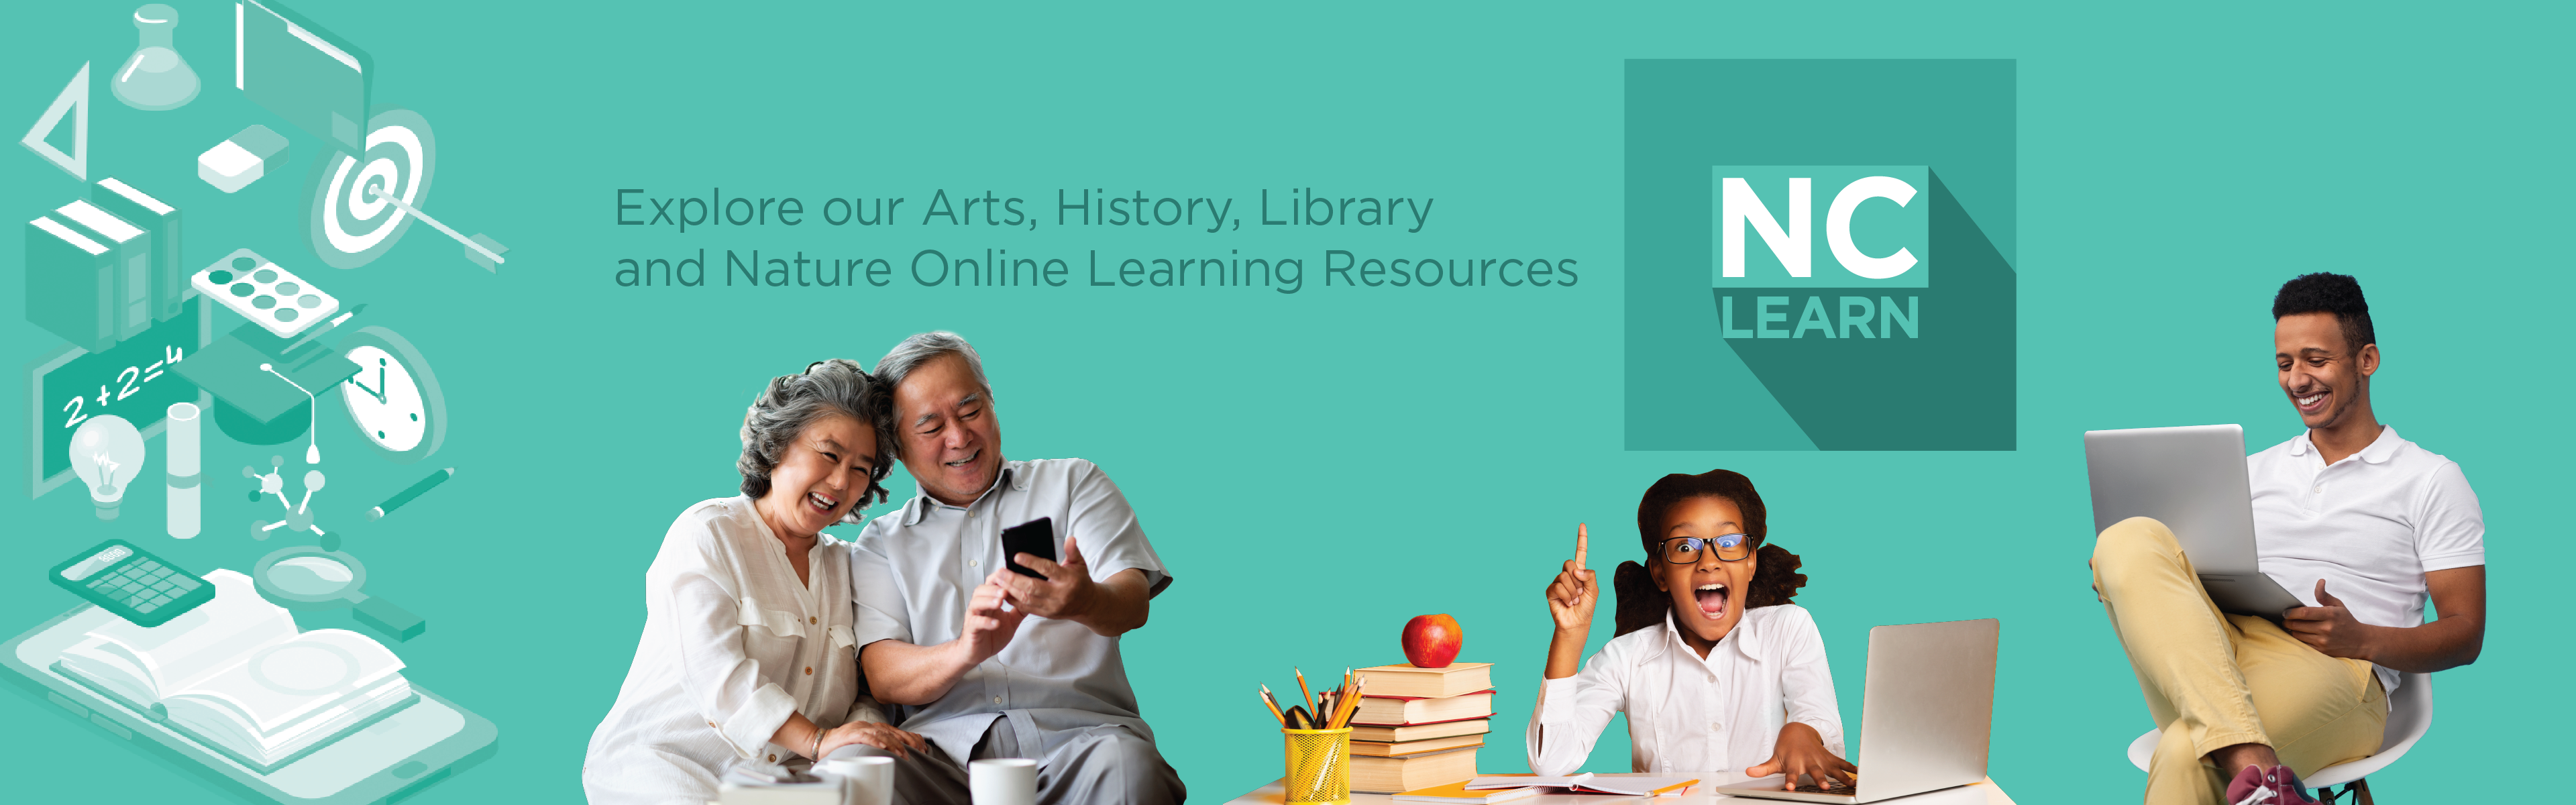 NCLearn: Explore our Arts, History, Library and Nature Online Resources.